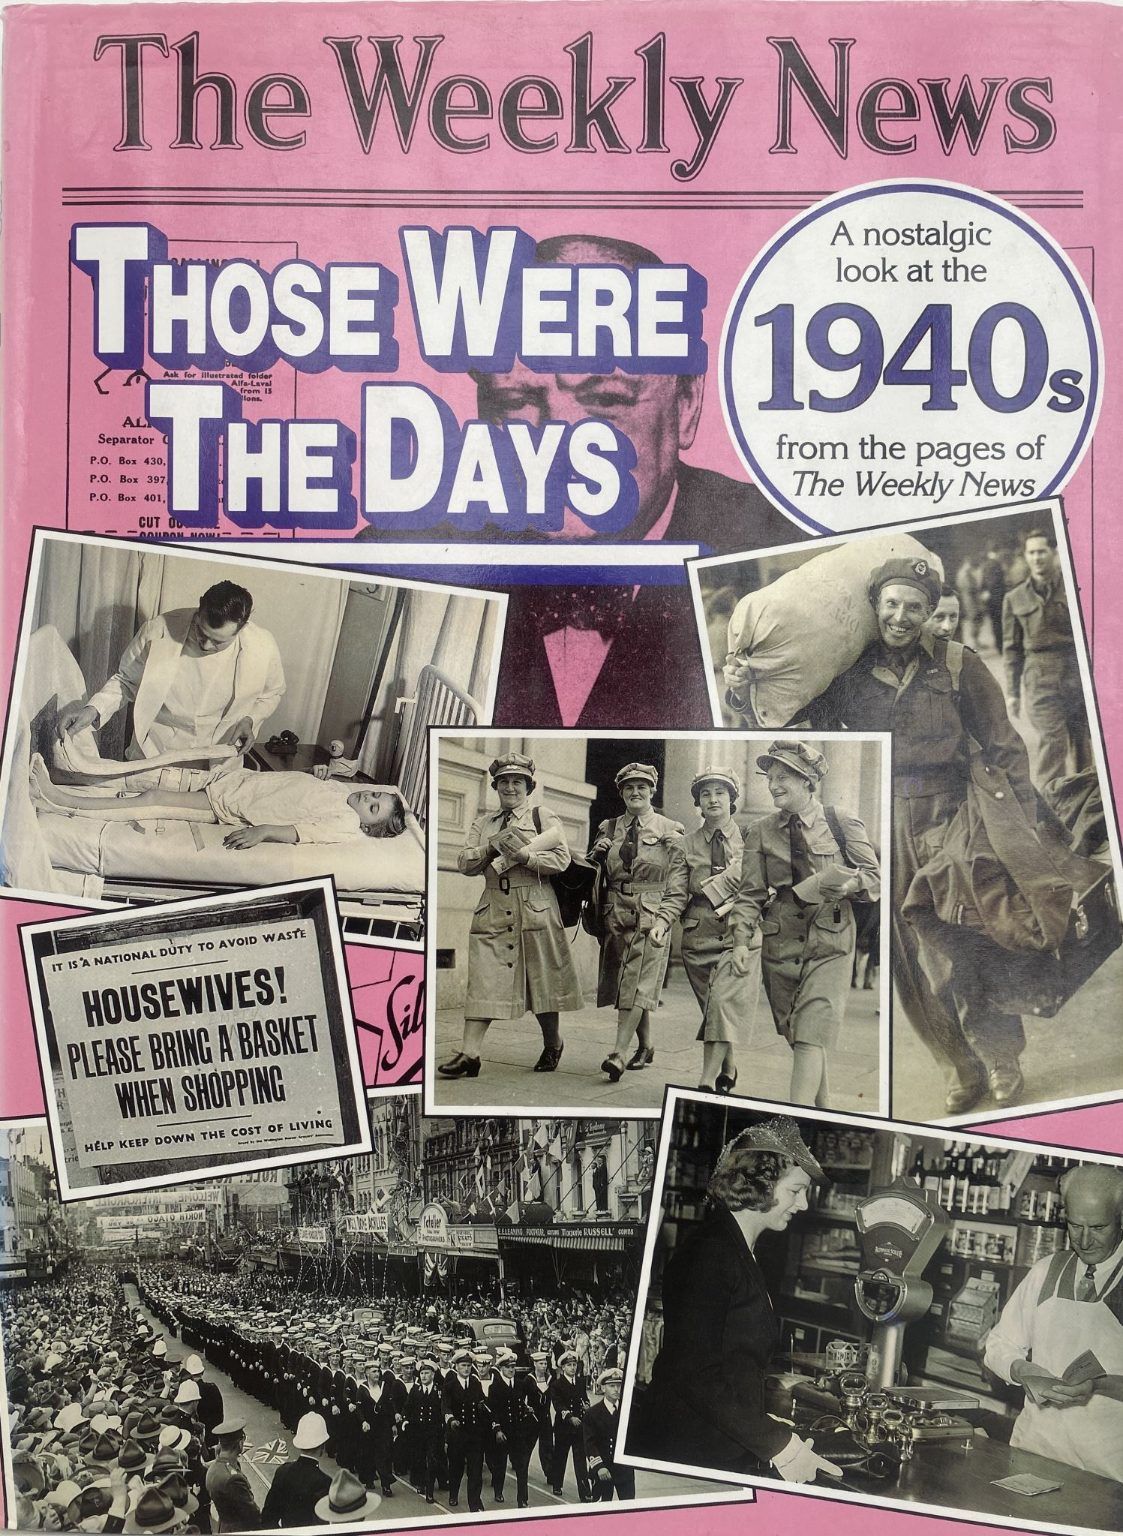 THOSE WERE THE DAYS: A nostalgic look at The Weekly News 1940s